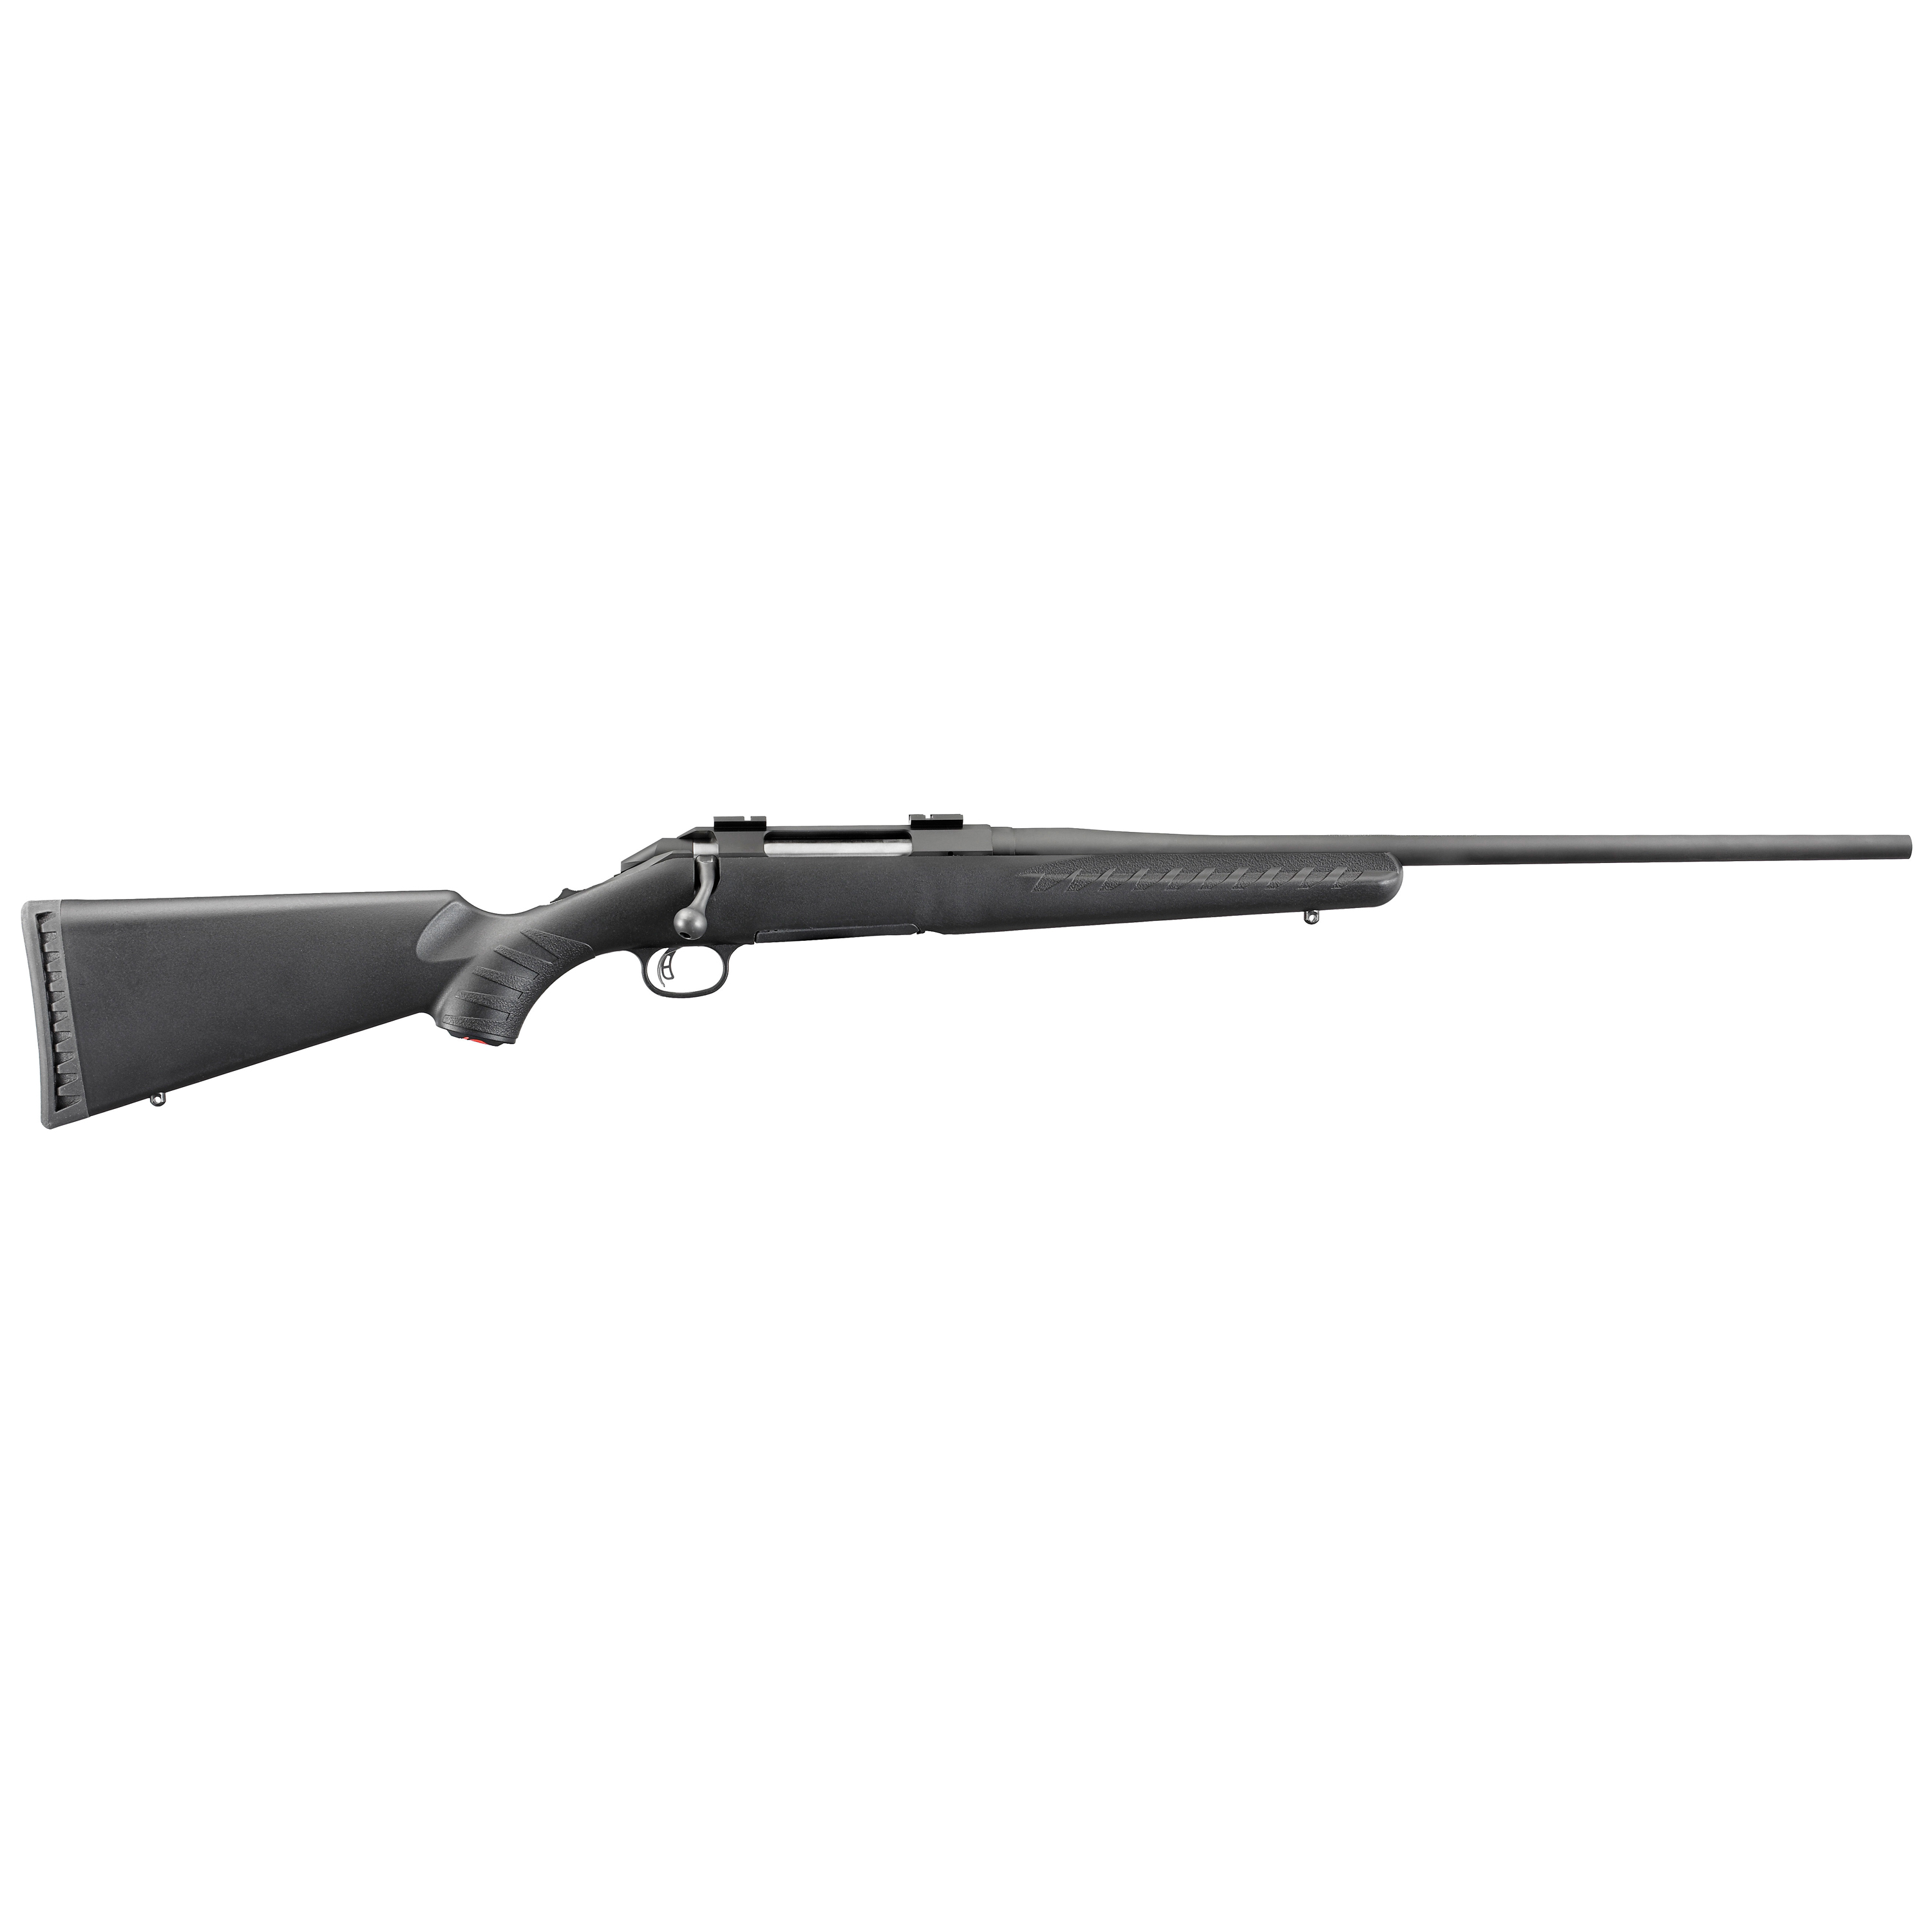 USED IN LIKE NEW CONDITION / Ruger, American Rifle Standard, Bolt-Action Rifle, 30-06, 22" Barrel, Matte Black Finish, Alloy Steel, Black Composite Stock, 4Rd